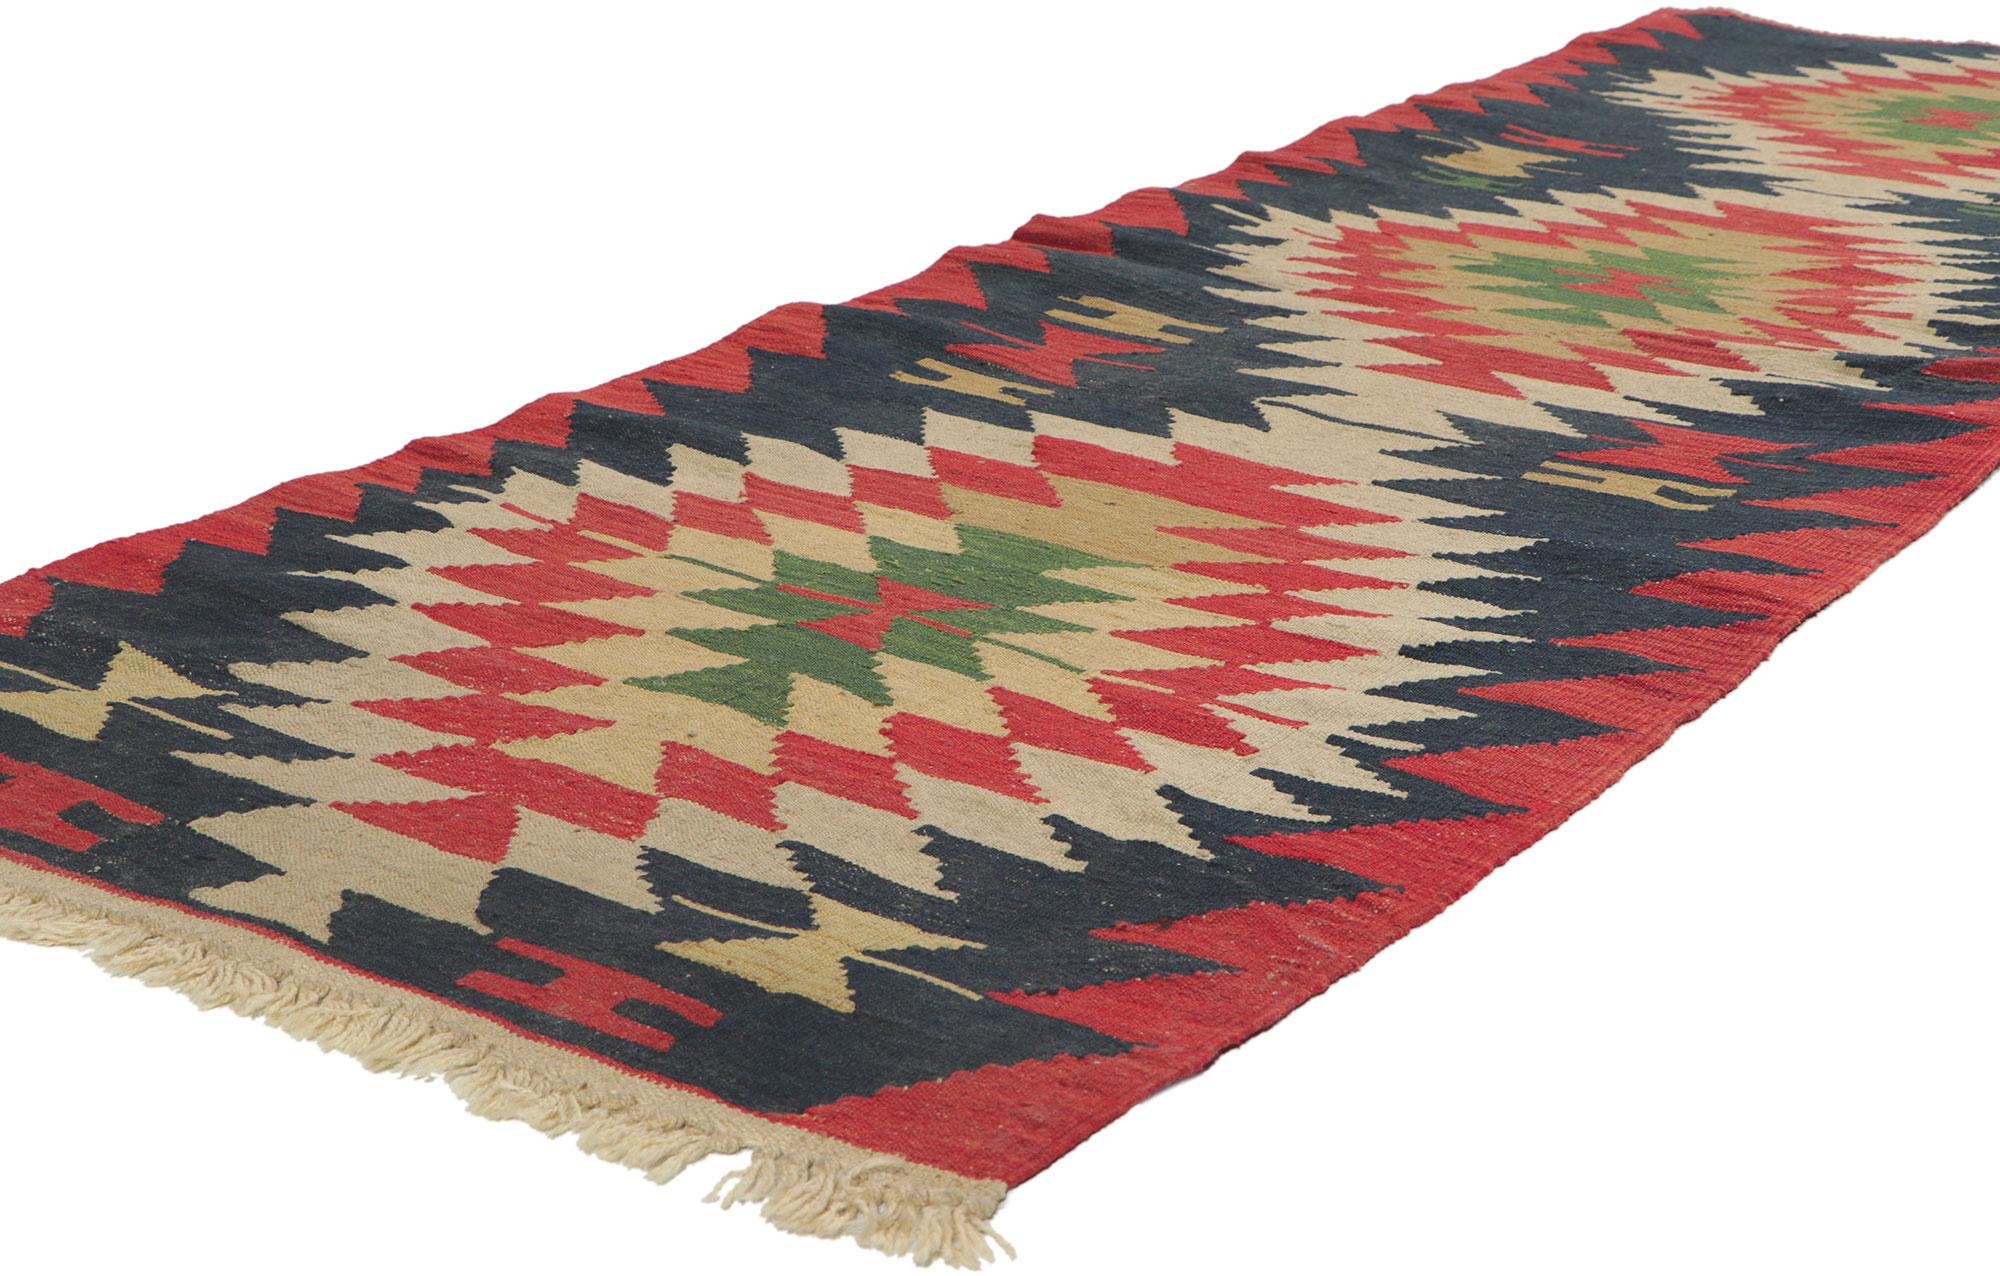 77601 Vintage Persian Shiraz Kilim Rug, 02'08 x 08'01. Full of tiny details and tribal style, this handwoven wool vintage Persian Shiraz kilim rug is a captivating vision of woven beauty. The eye-catching geometric pattern woven into this vintage